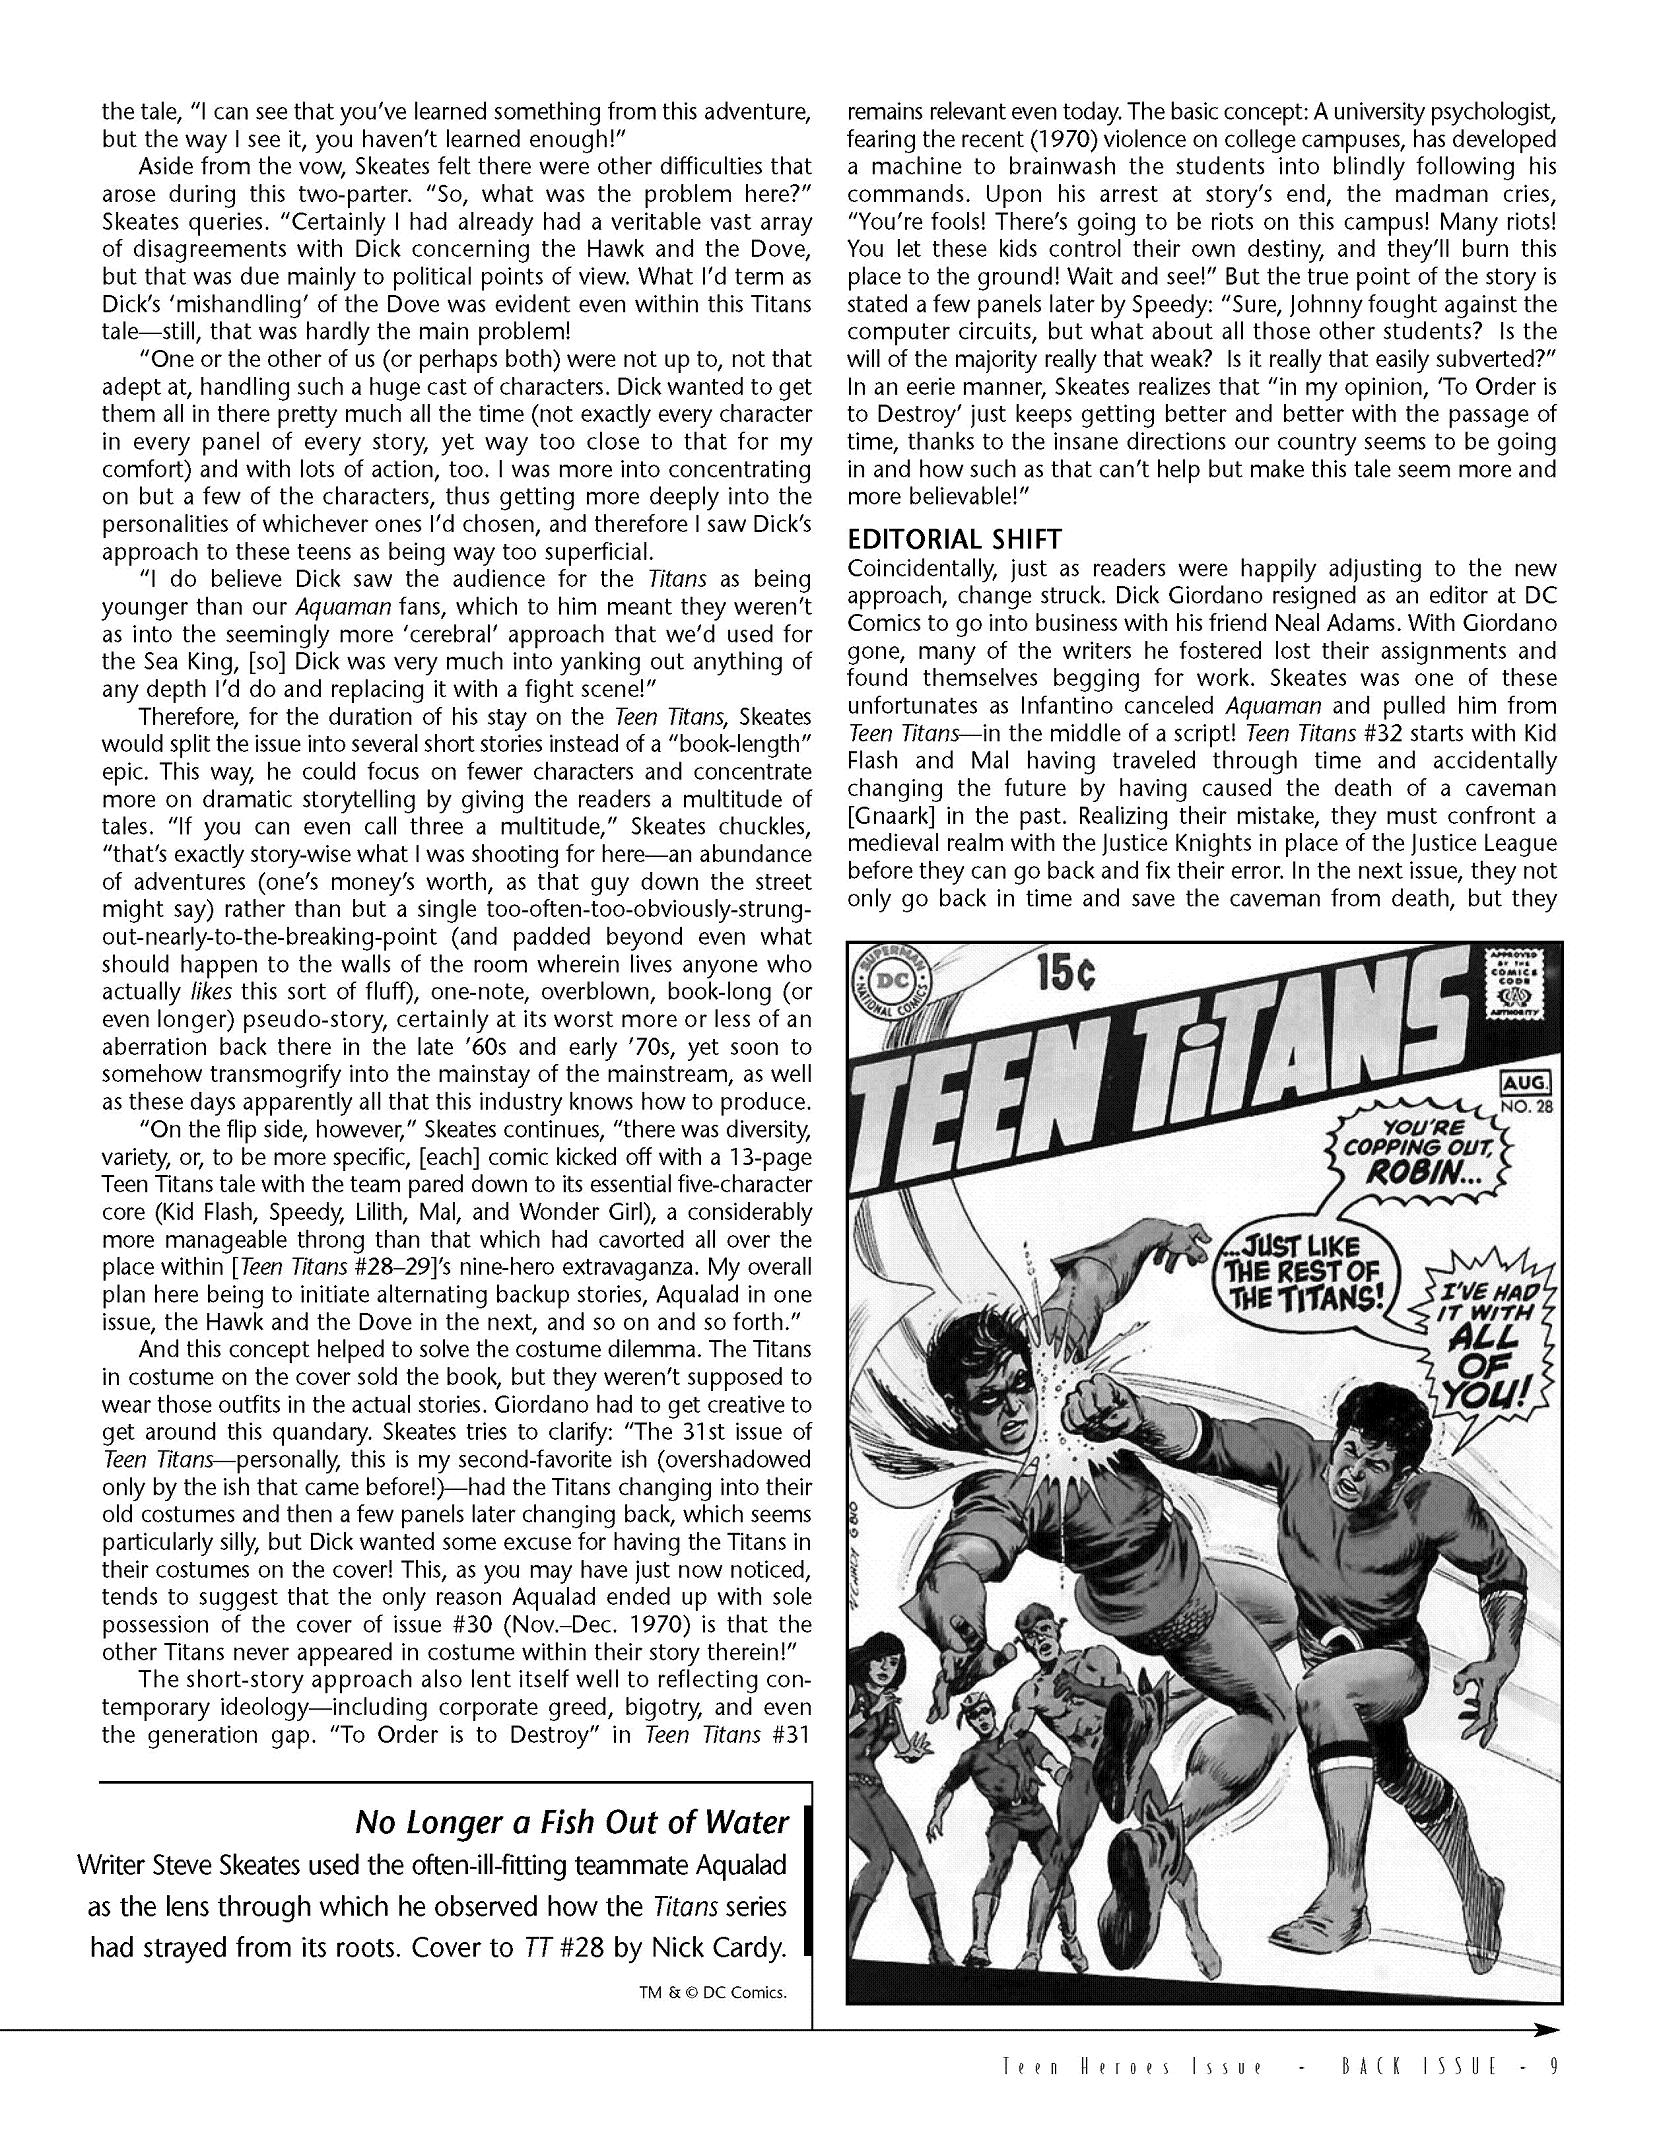 Read online Back Issue comic -  Issue #33 - 11